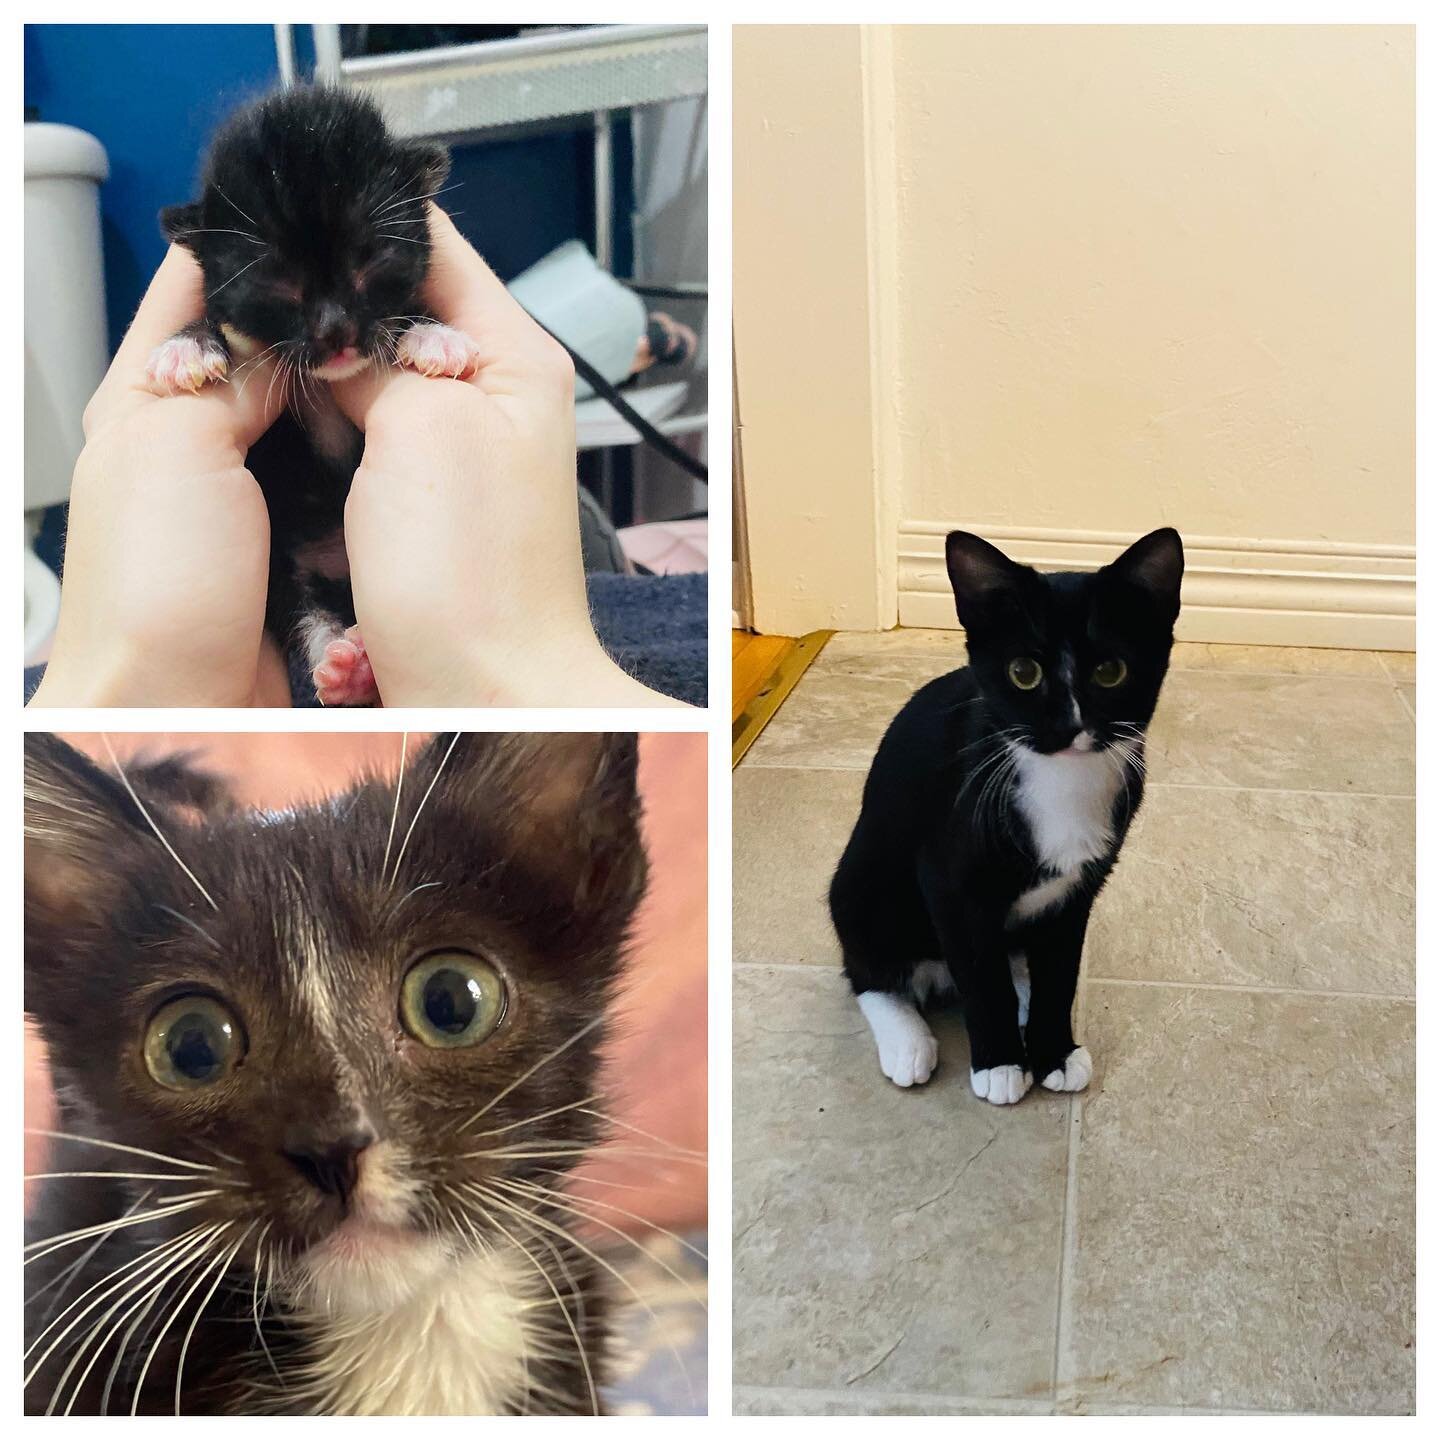 Adoption Announcement!! 
After patiently waiting 6 months , our sweet Tuxie Serena has found her forever home ❤️ Happy life to our beautiful girl 💜 You deserve the best life! #adopttosavealife #fosterkittens #rescuekittens #bottlefedkittens #newborn